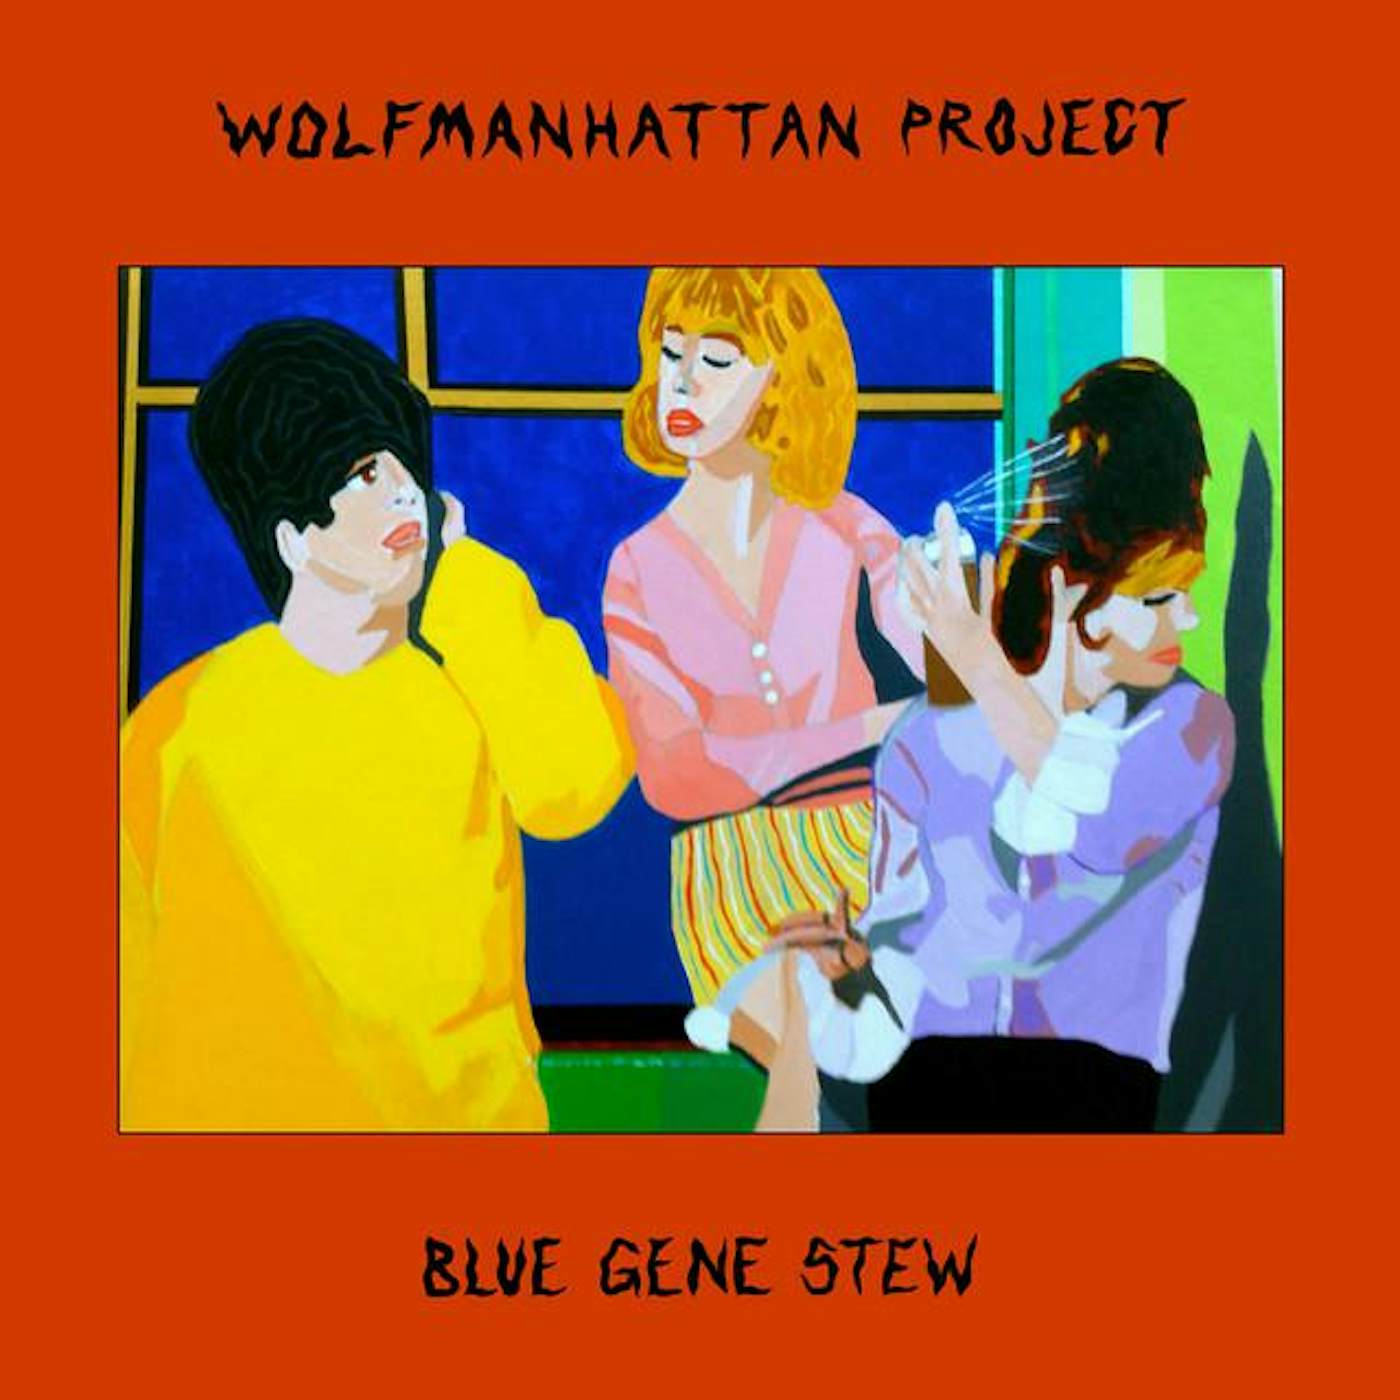 The Wolfmanhattan Project